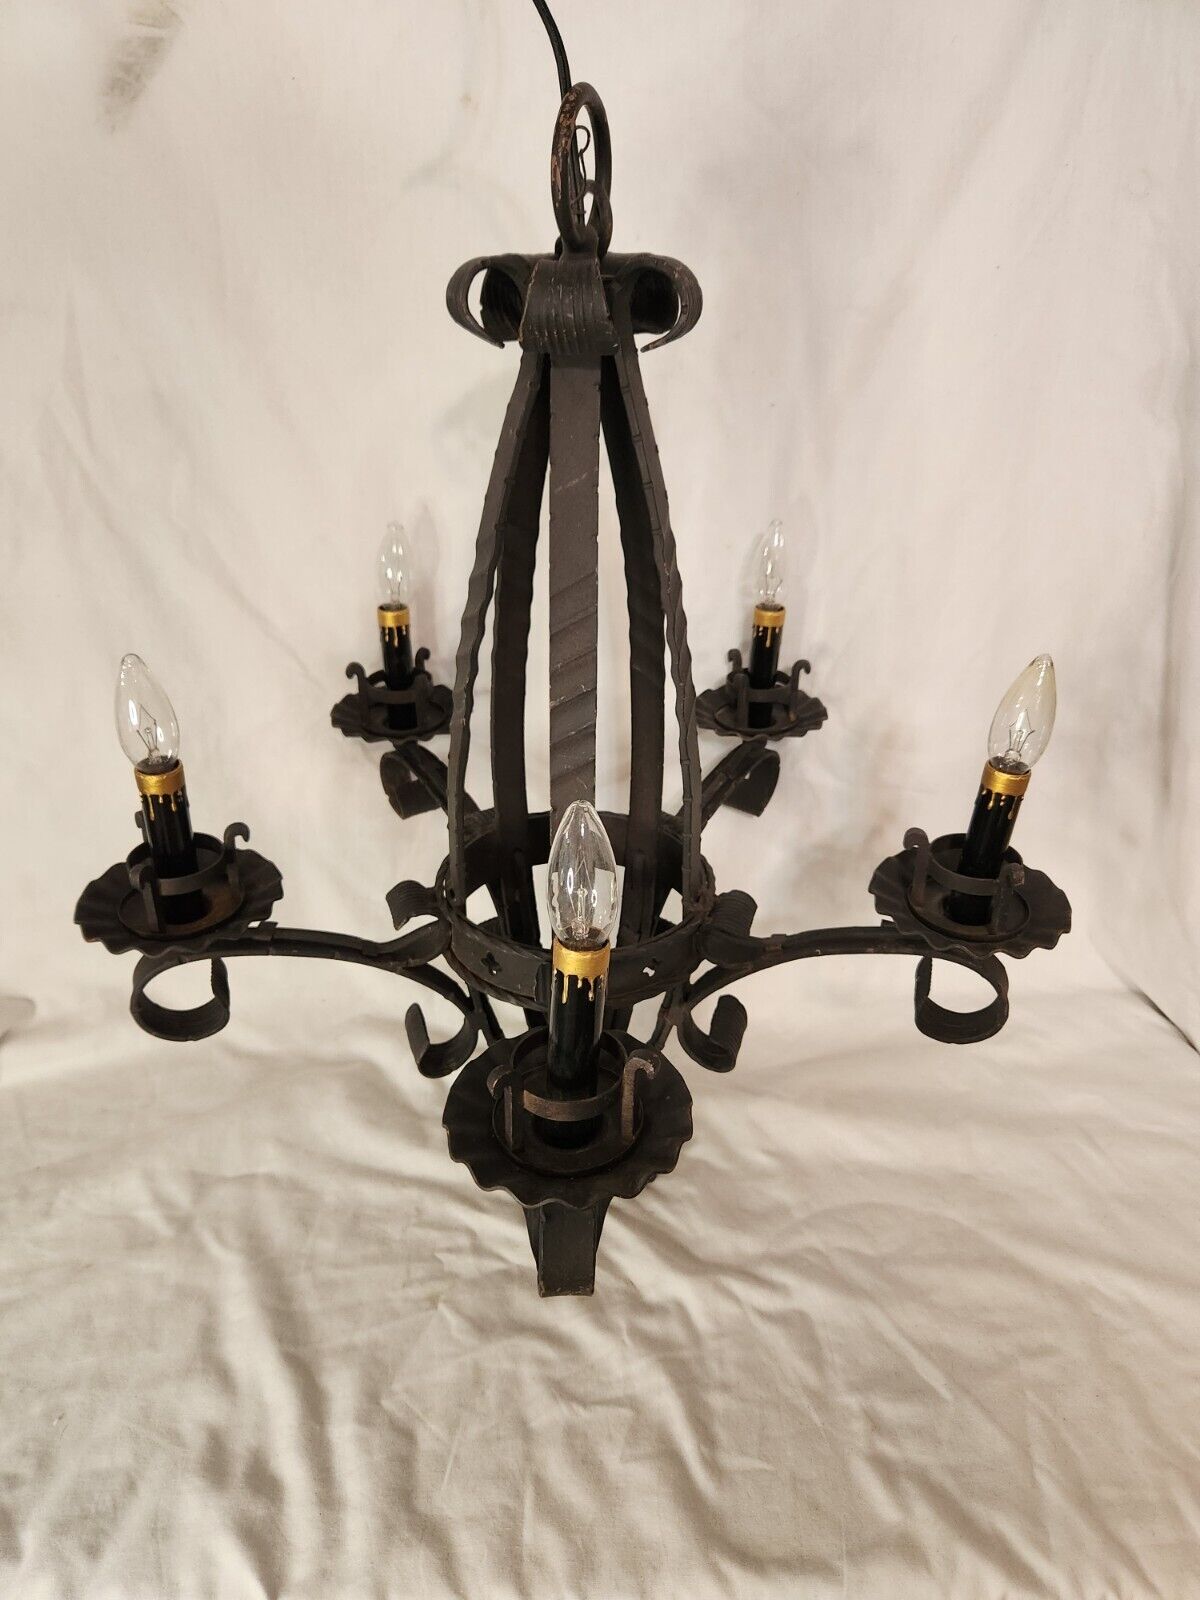 Vintage Spanish Colonial / Gothic Black Wrought Iron Hanging Chandelier